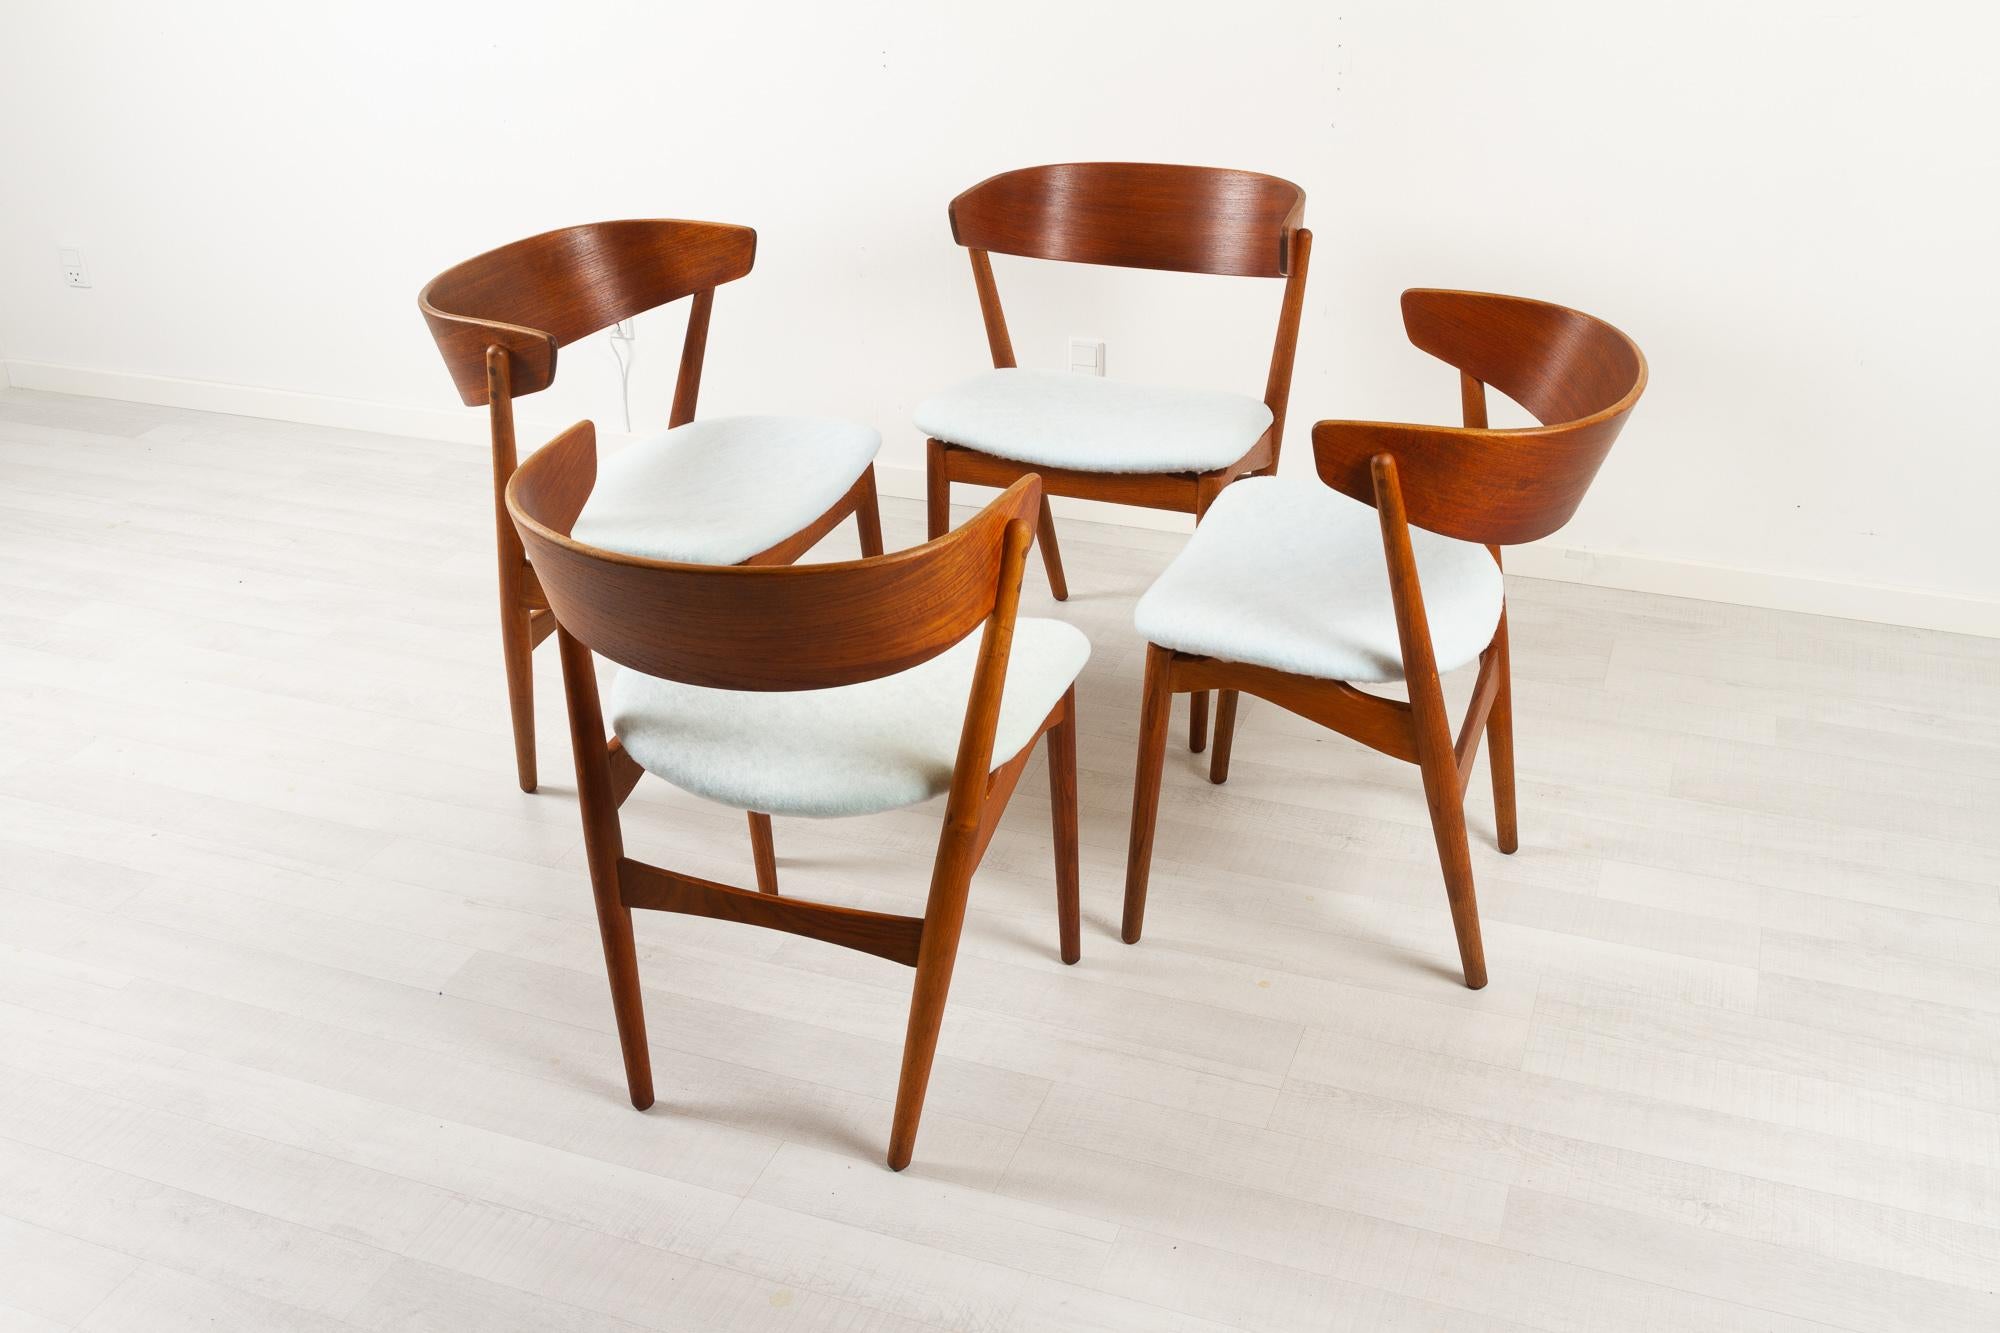 Mid-20th Century Vintage Danish Teak Dining Chairs No. 7 by Helge Sibast 1960s Set of 4 For Sale